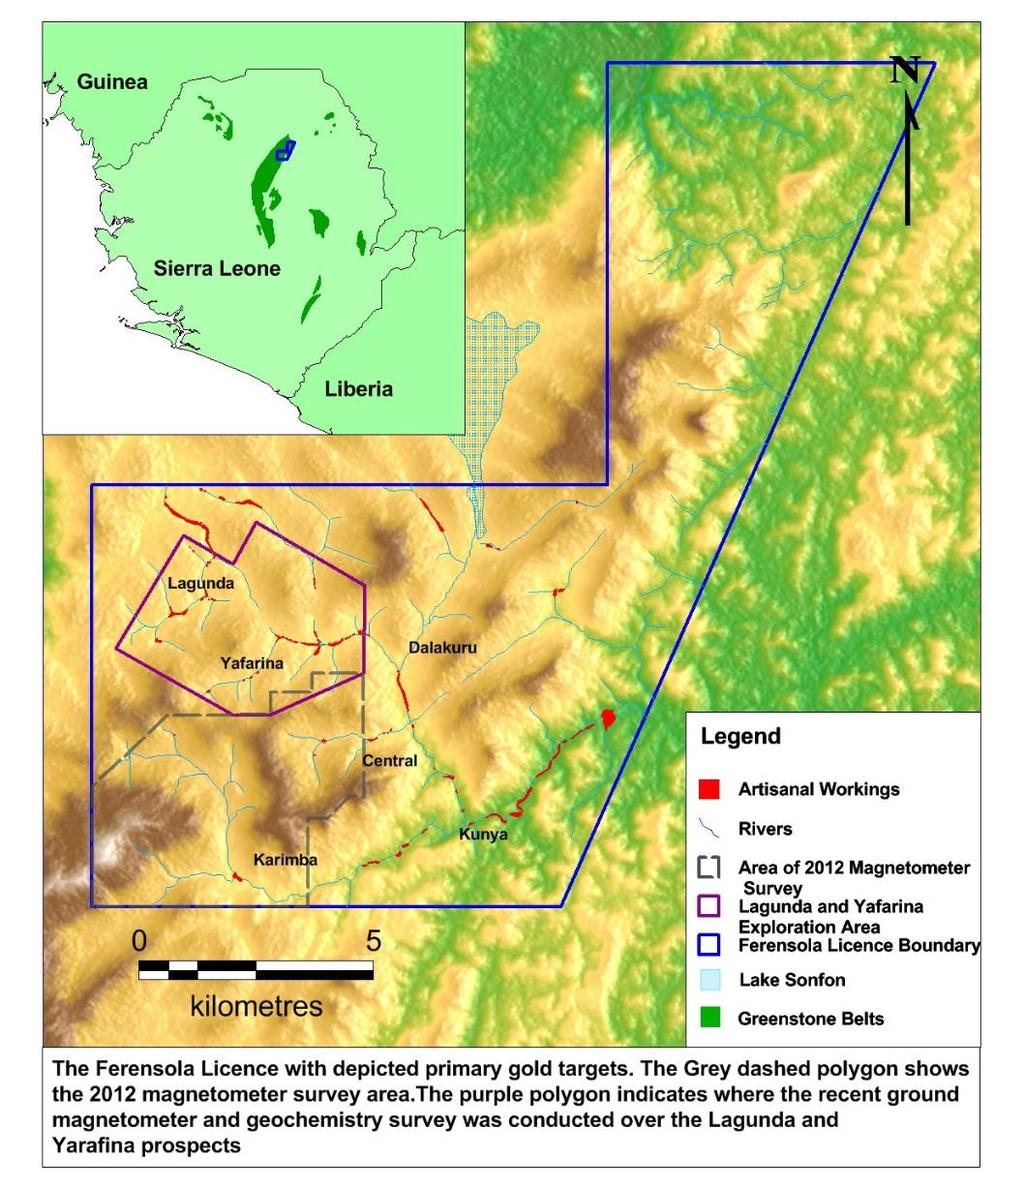 GOLD MINERALISATION Areas prospective for gold are situated within the highly prospective Sula-Kangari Greenstone Belt rocks (belt hosts Amara Mining Plc s 2.